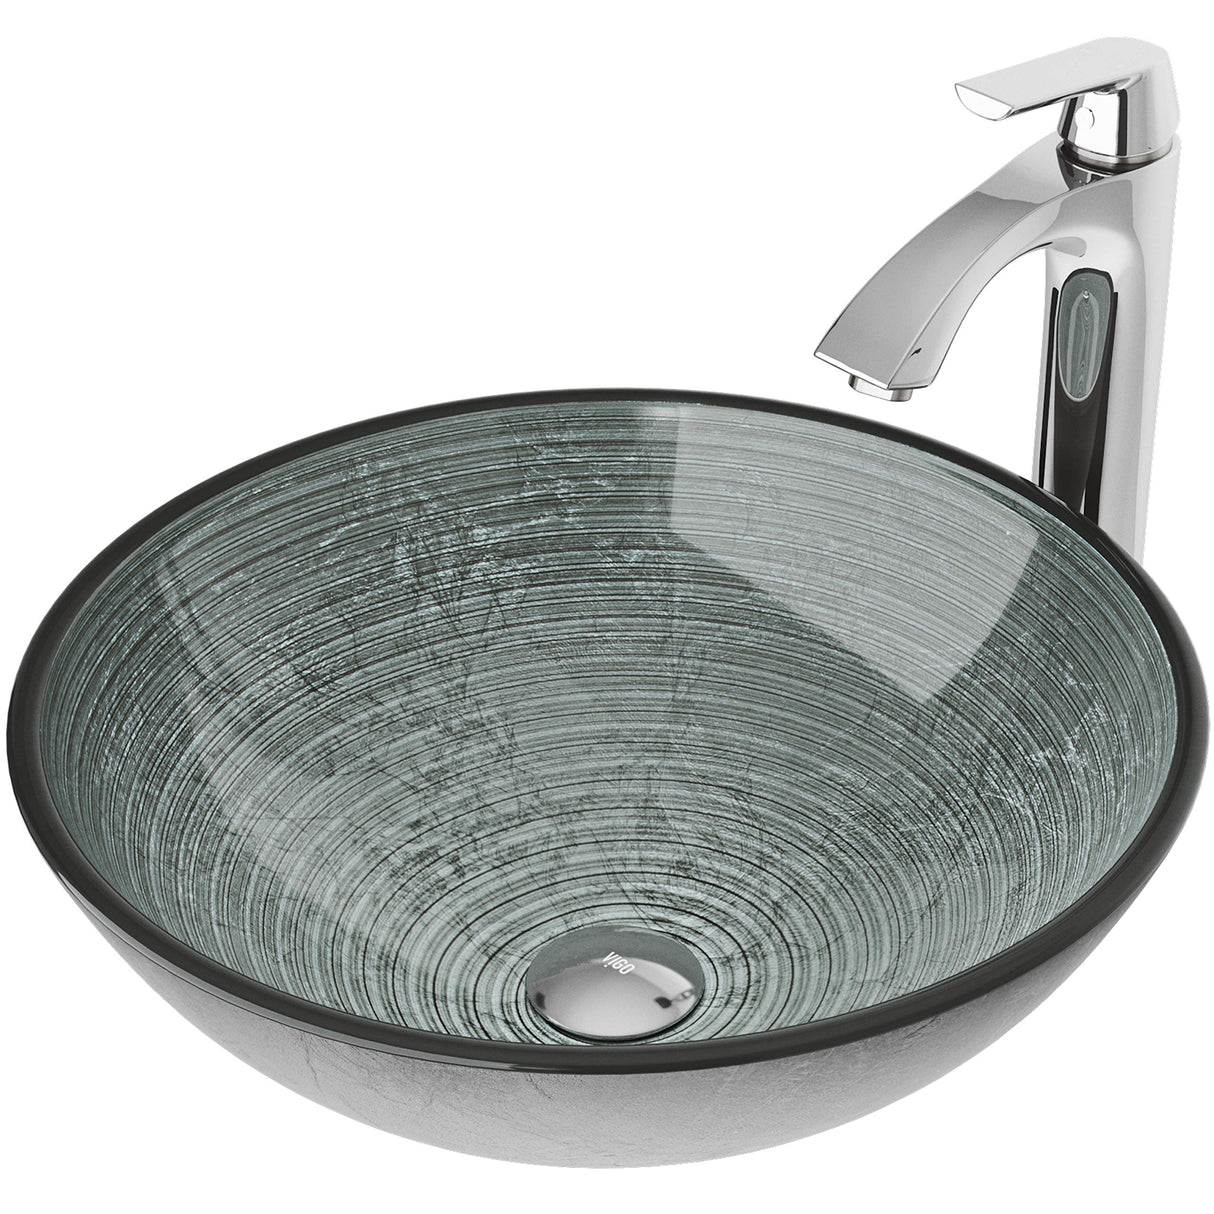 VIGO VGT839 16.5" L -16.5" W -12.38" H Handmade Glass Round Vessel Bathroom Sink Set in Simply Silver Finish with Chrome Single-Handle Single Hole Faucet and Pop Up Drain